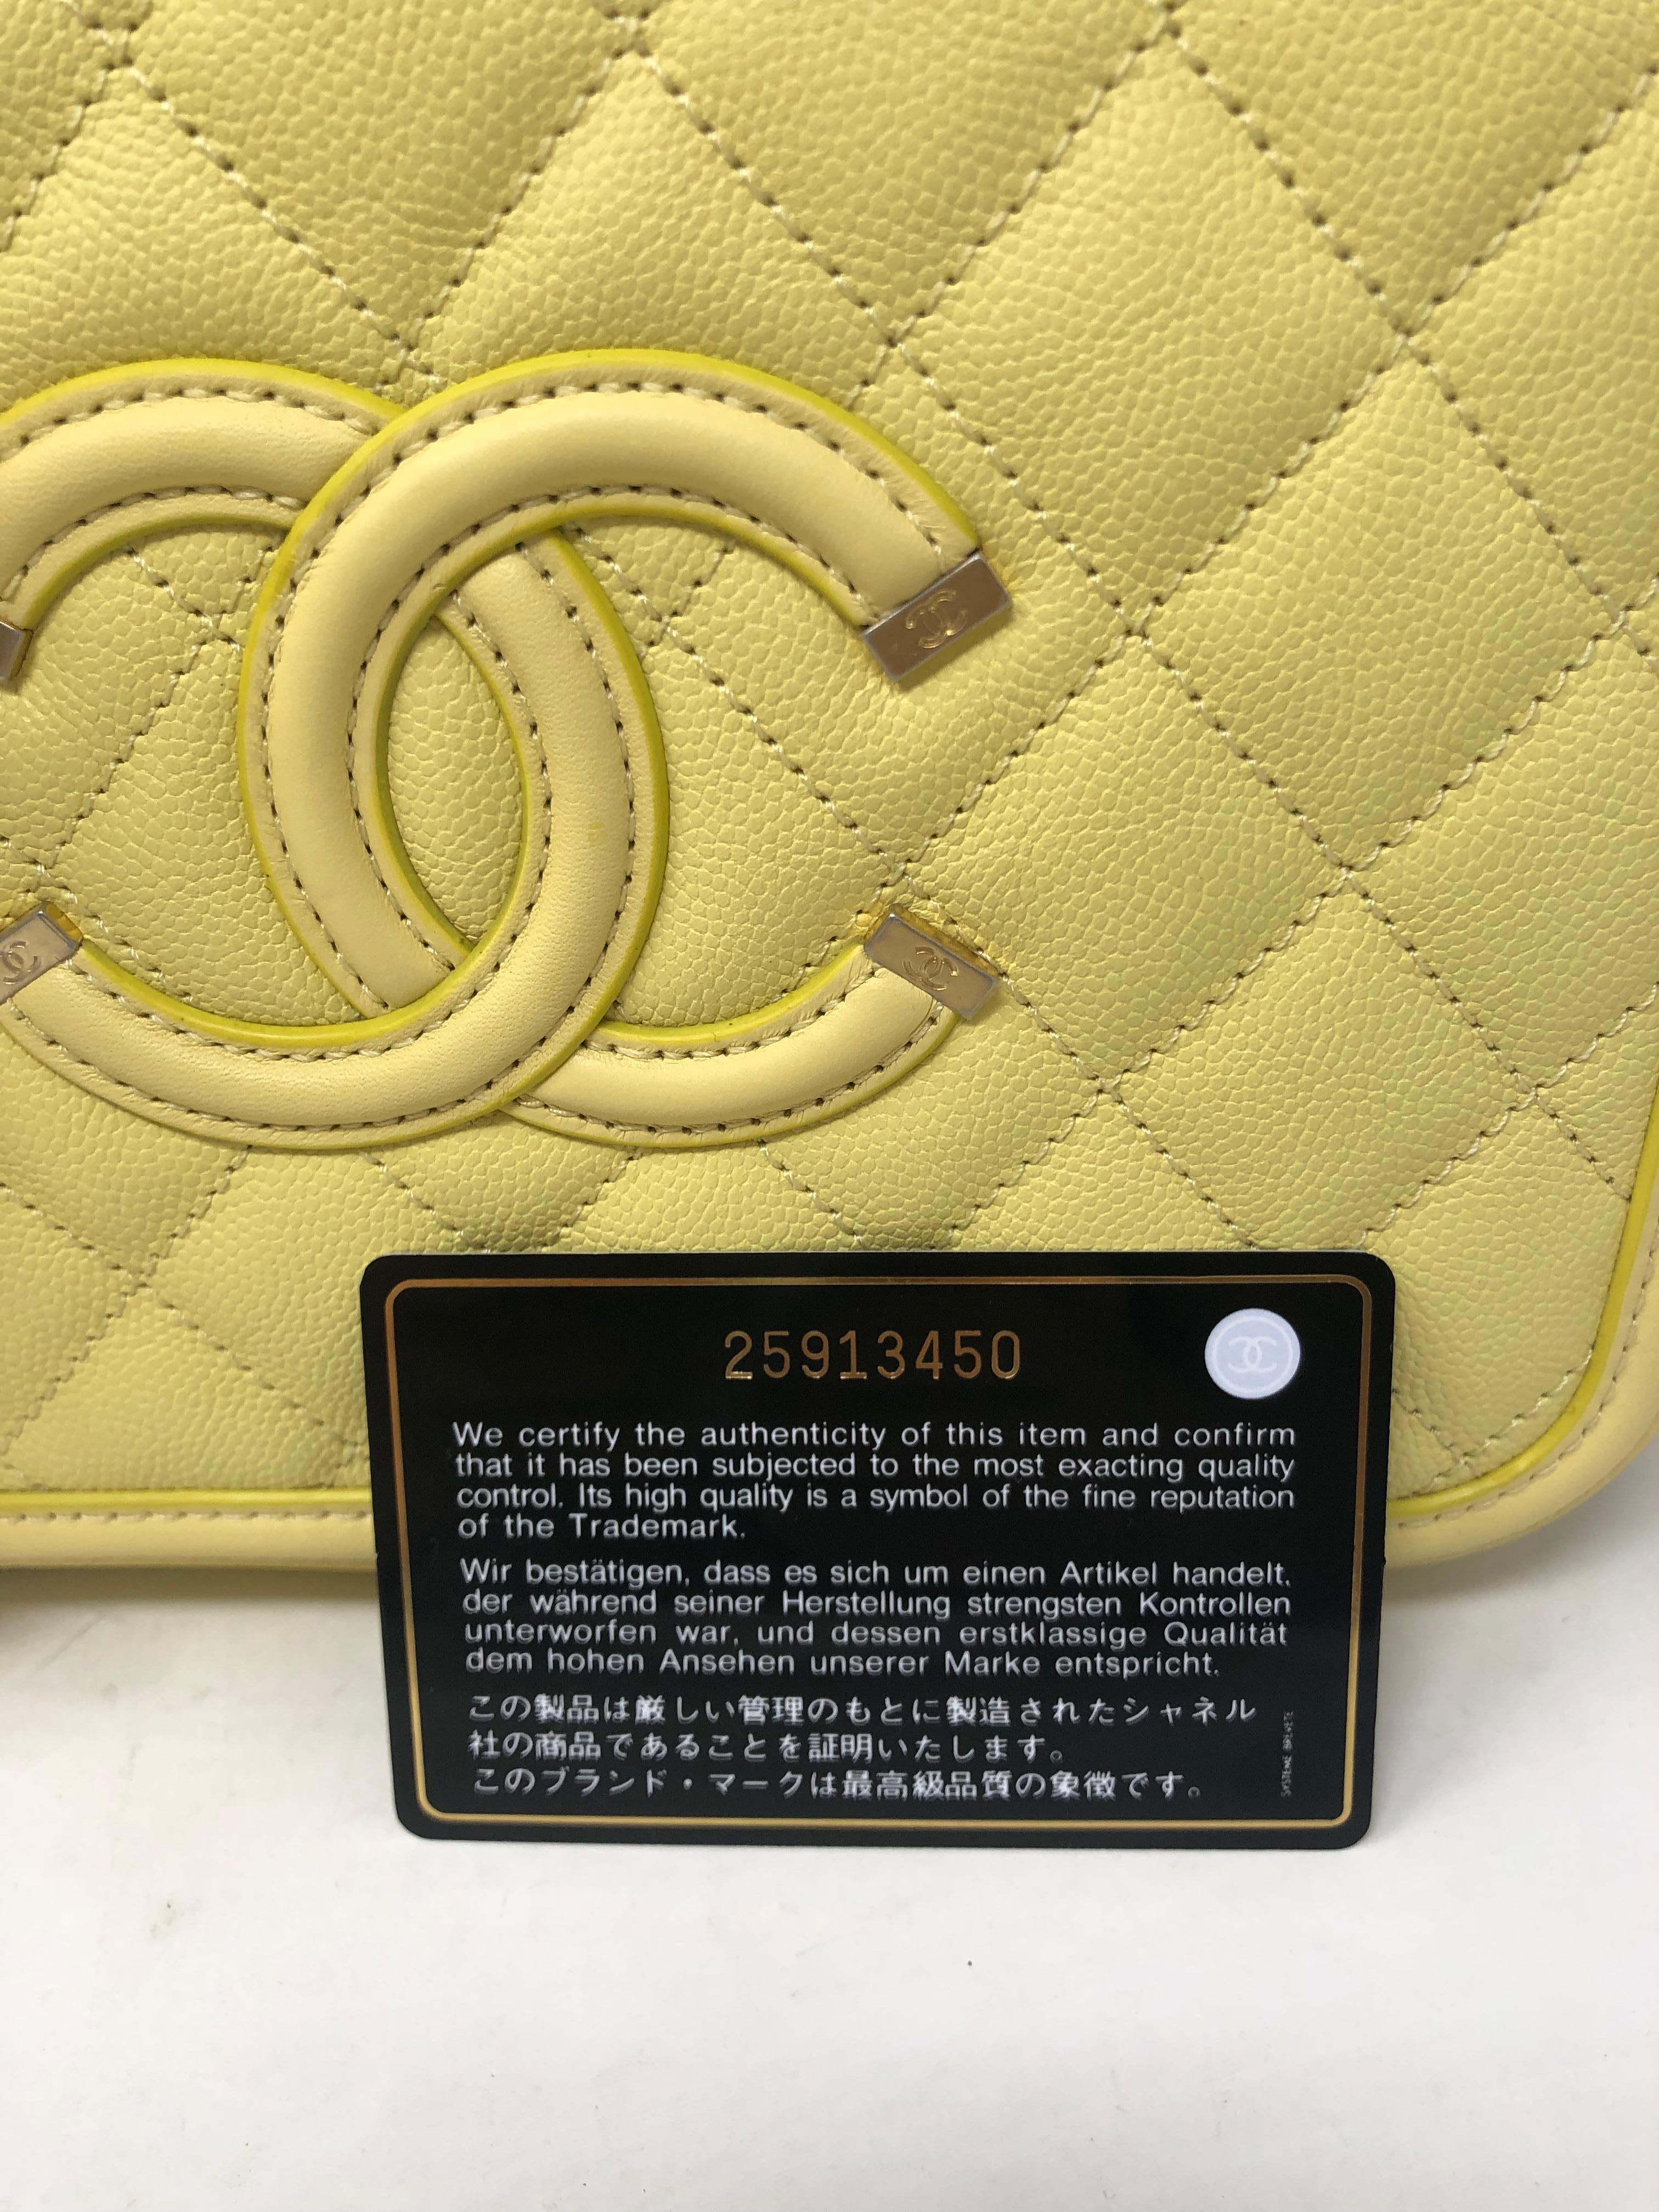 Chanel Filigree Vanity Case Bag in pale yellow leather. Rare color and most wanted bag for Chanel lovers. Nice caviar leather. Never used. Brushed gold tone hardware with lock and keys. Includes authenticity card, dust cover, and original box.